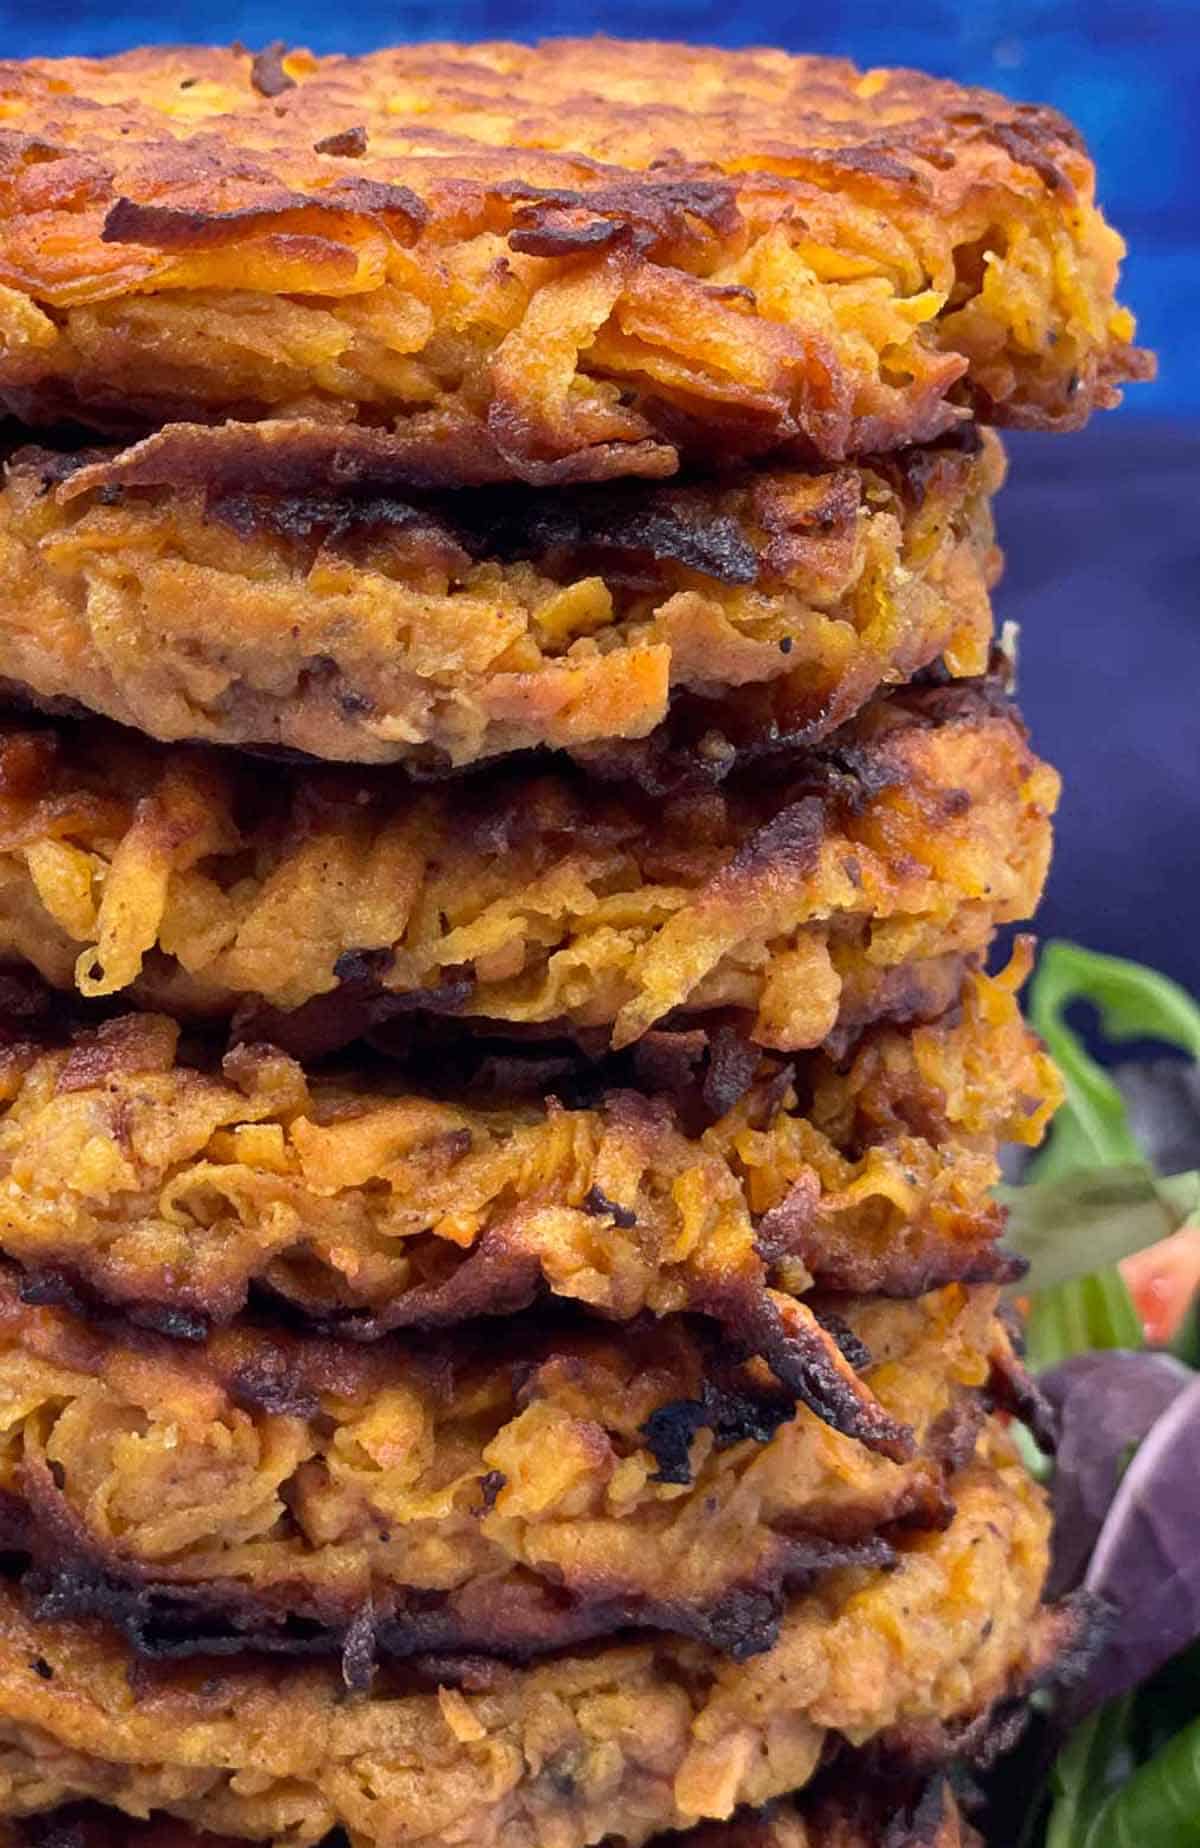 A stack of freshly made sweet potato fritters.